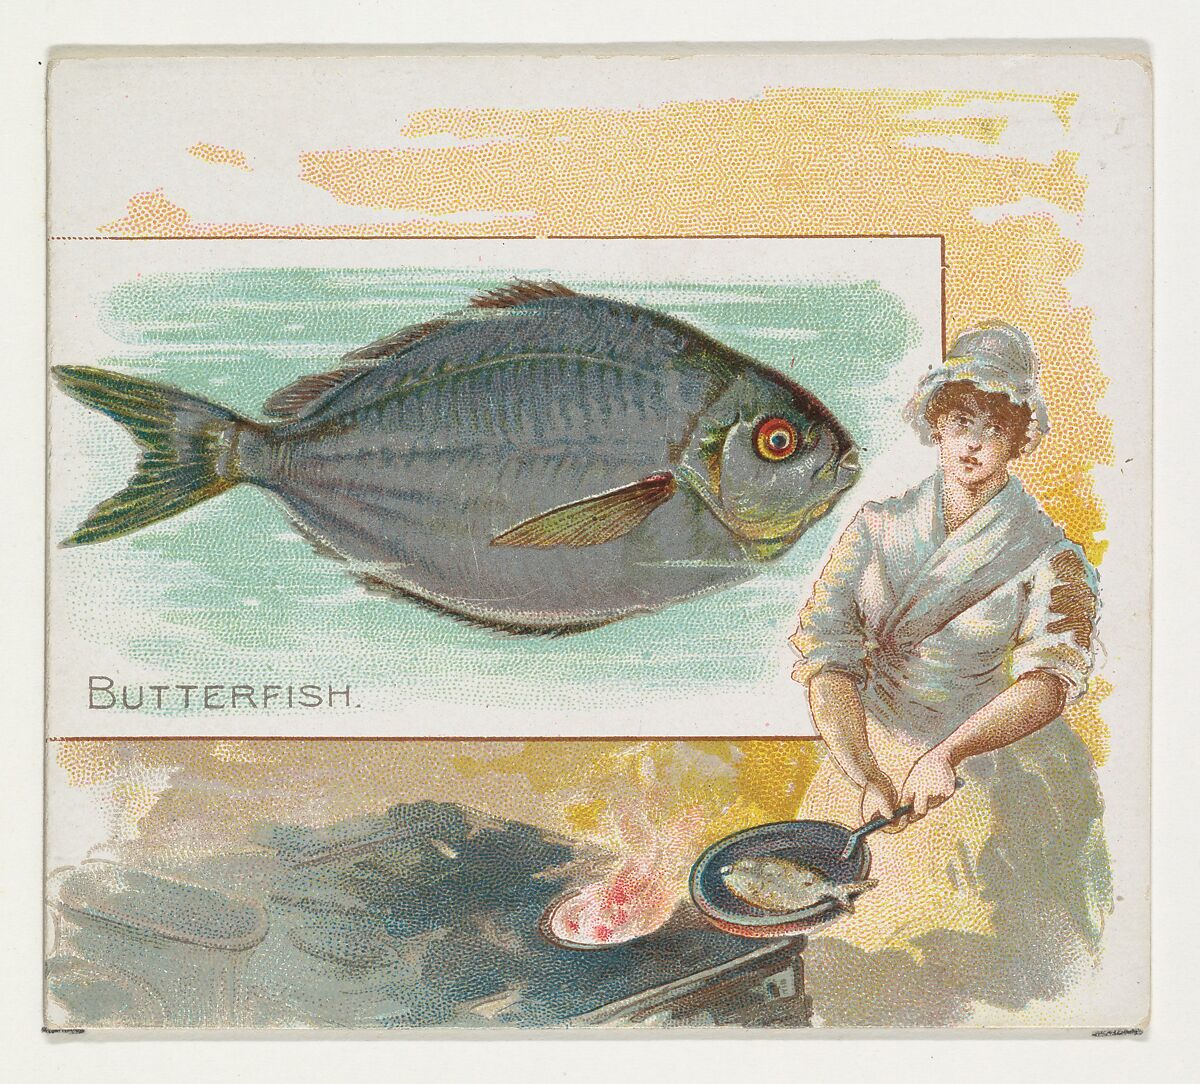 Butterfish, from Fish from American Waters series (N39) for Allen & Ginter Cigarettes, Issued by Allen &amp; Ginter (American, Richmond, Virginia), Commercial color lithograph 